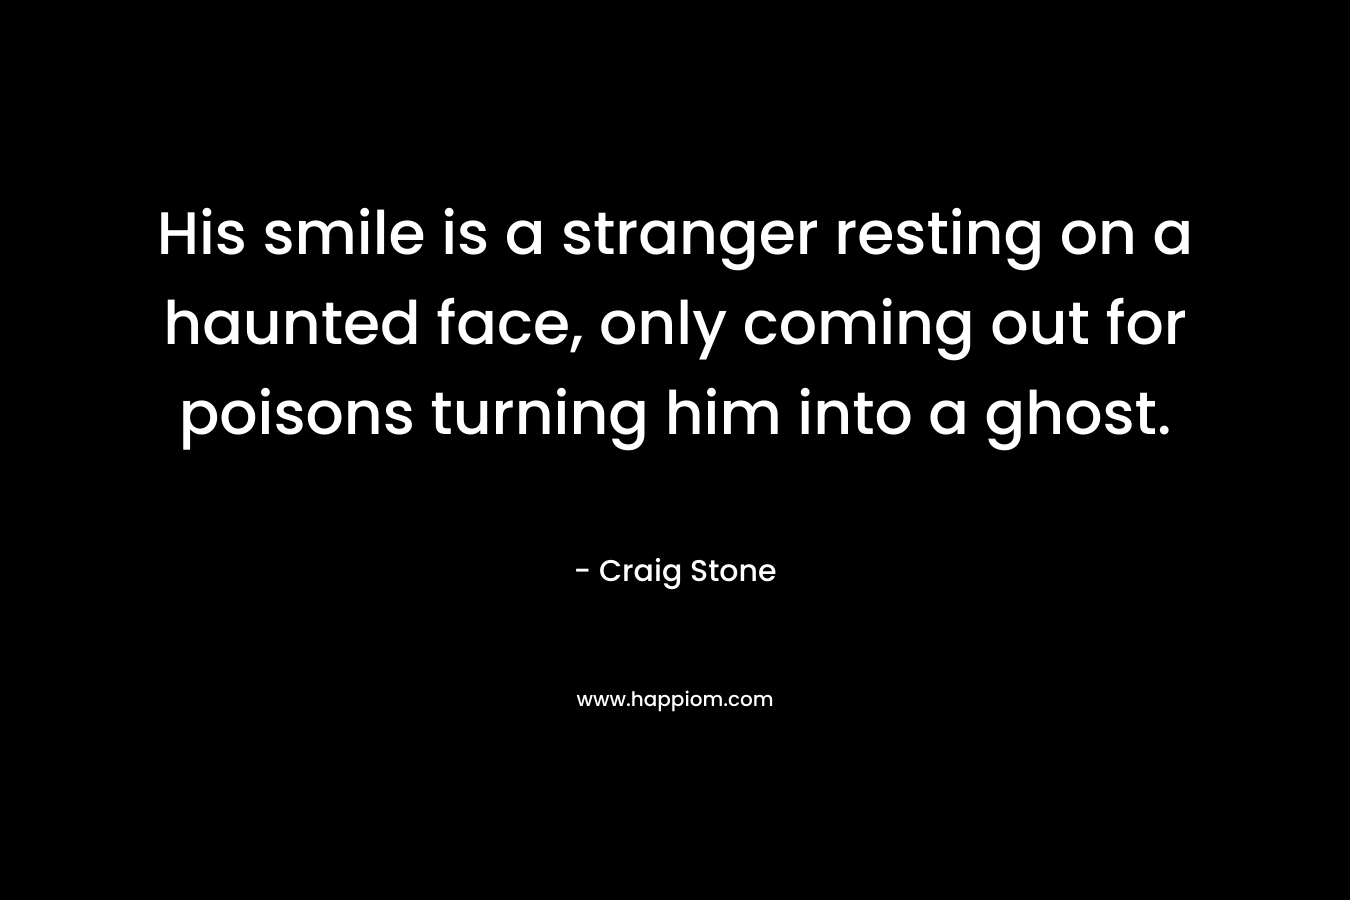 His smile is a stranger resting on a haunted face, only coming out for poisons turning him into a ghost.